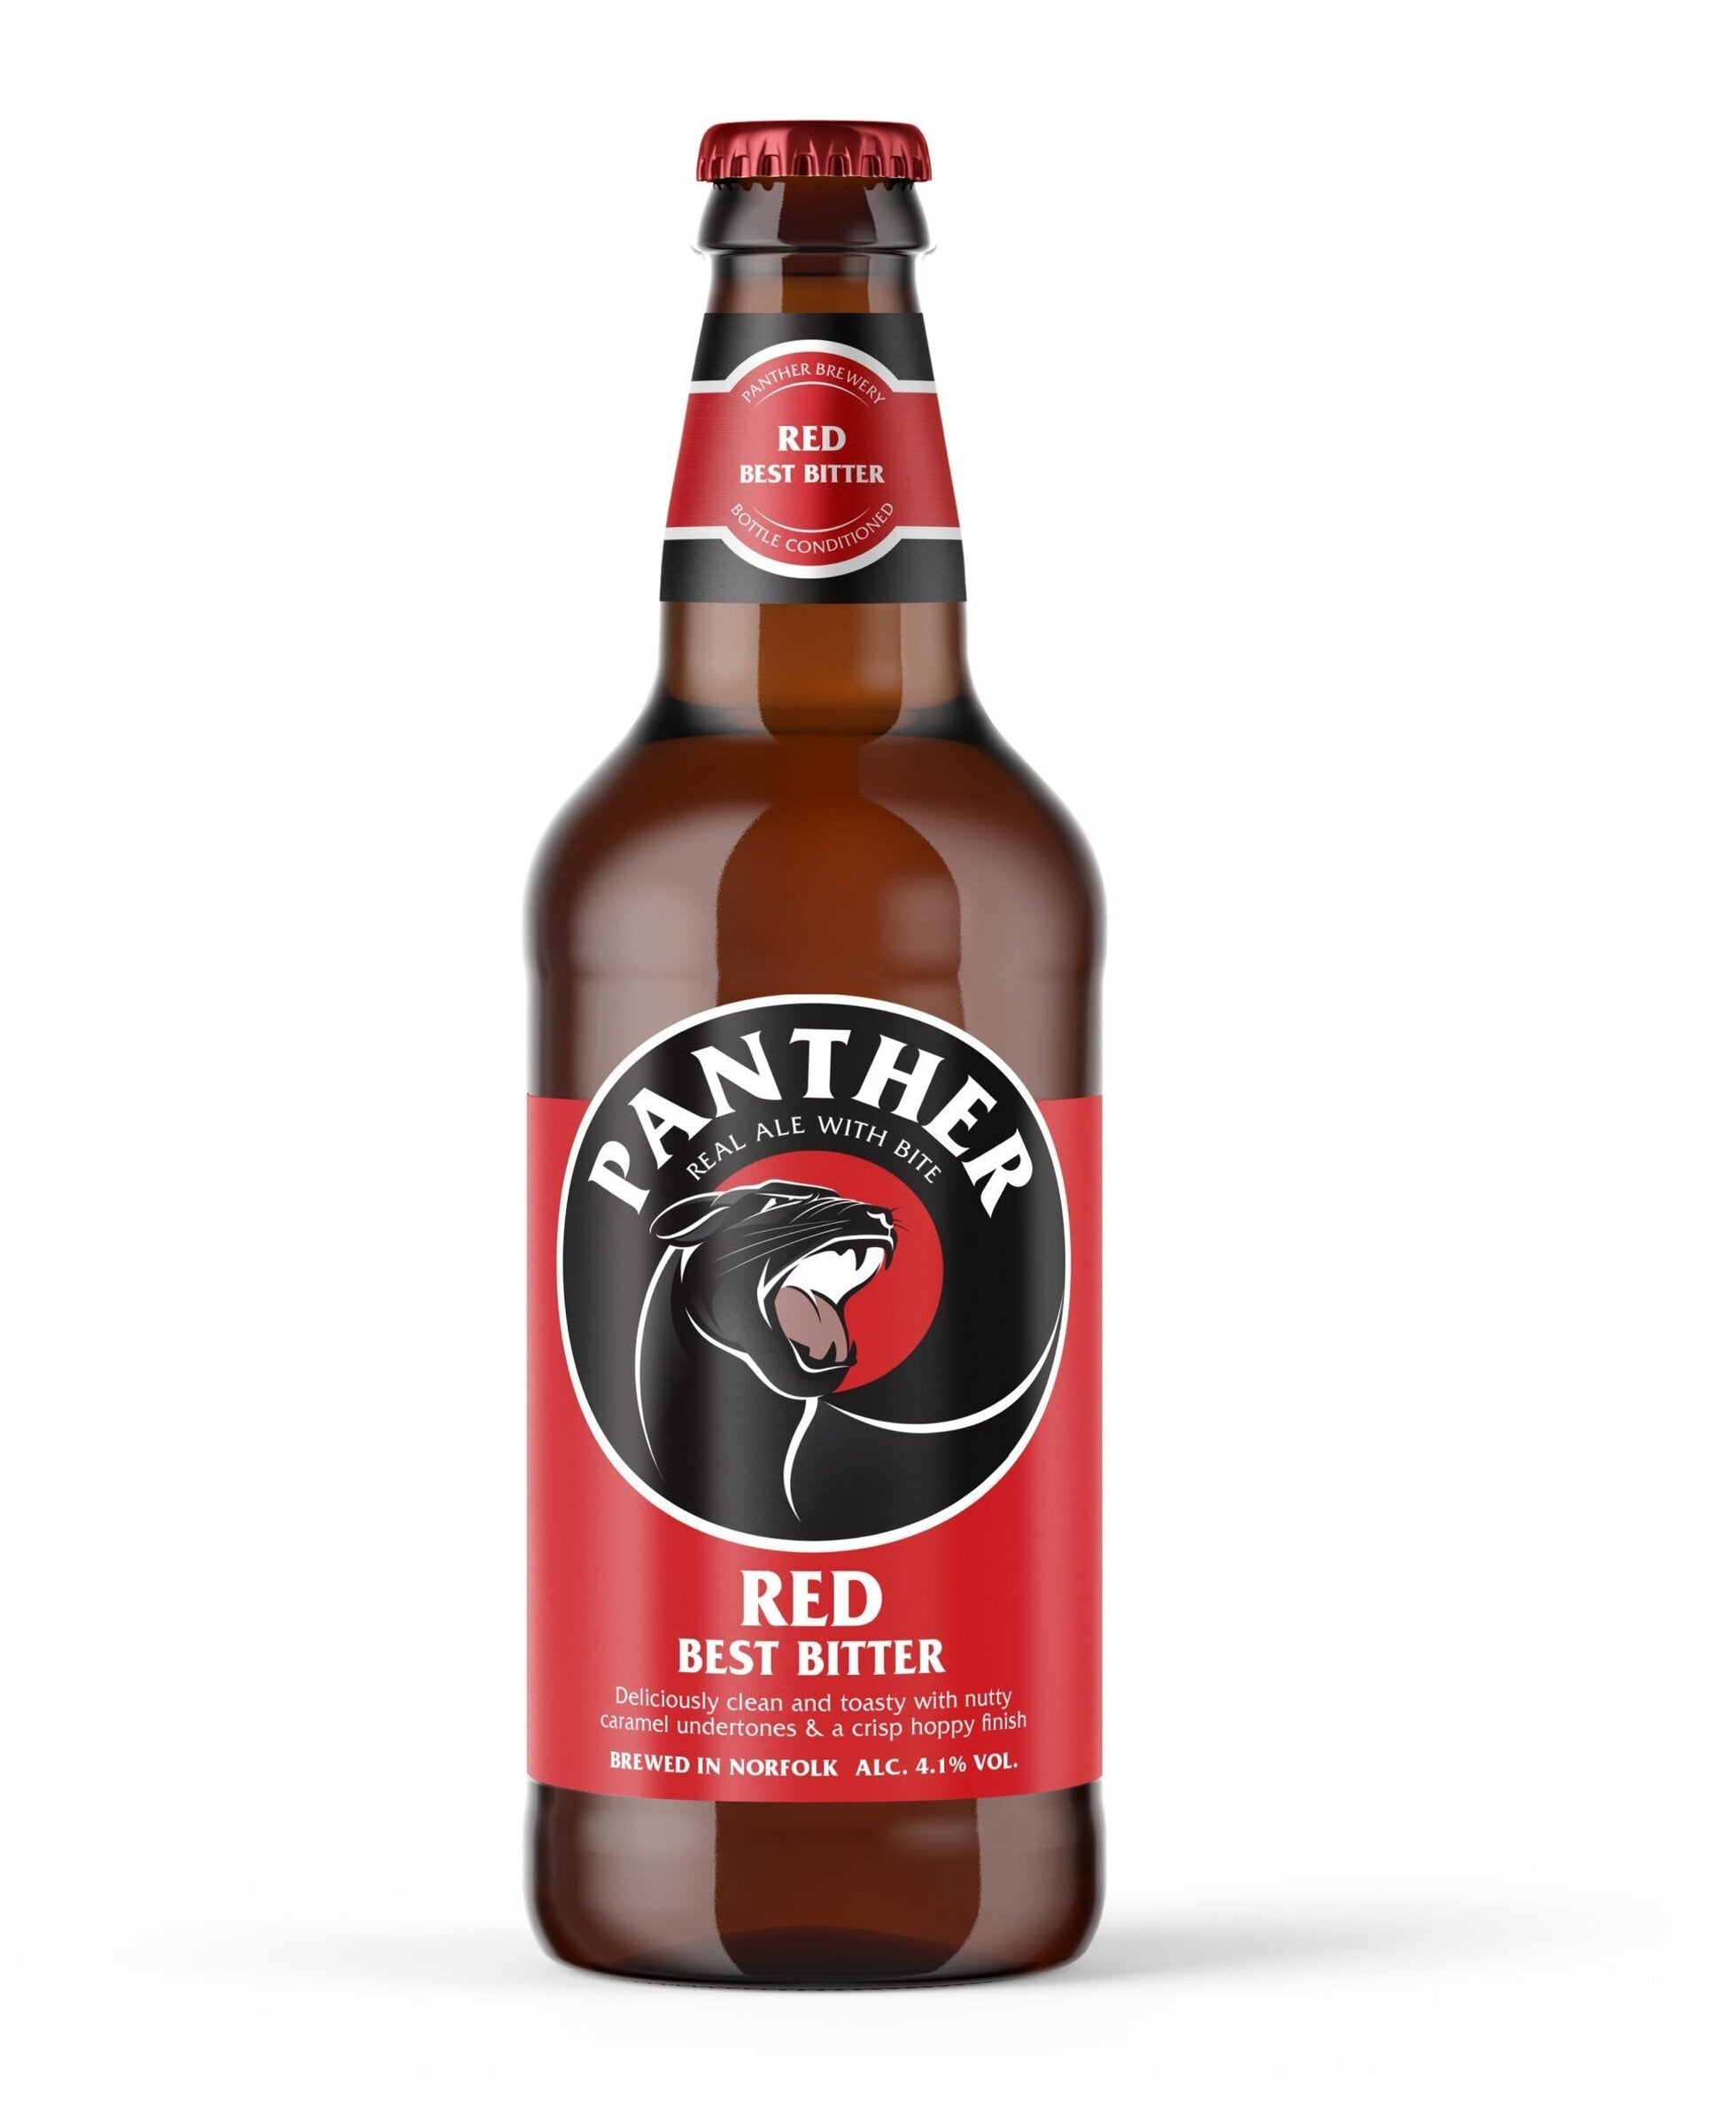 Panther Brewery - Red Bitter